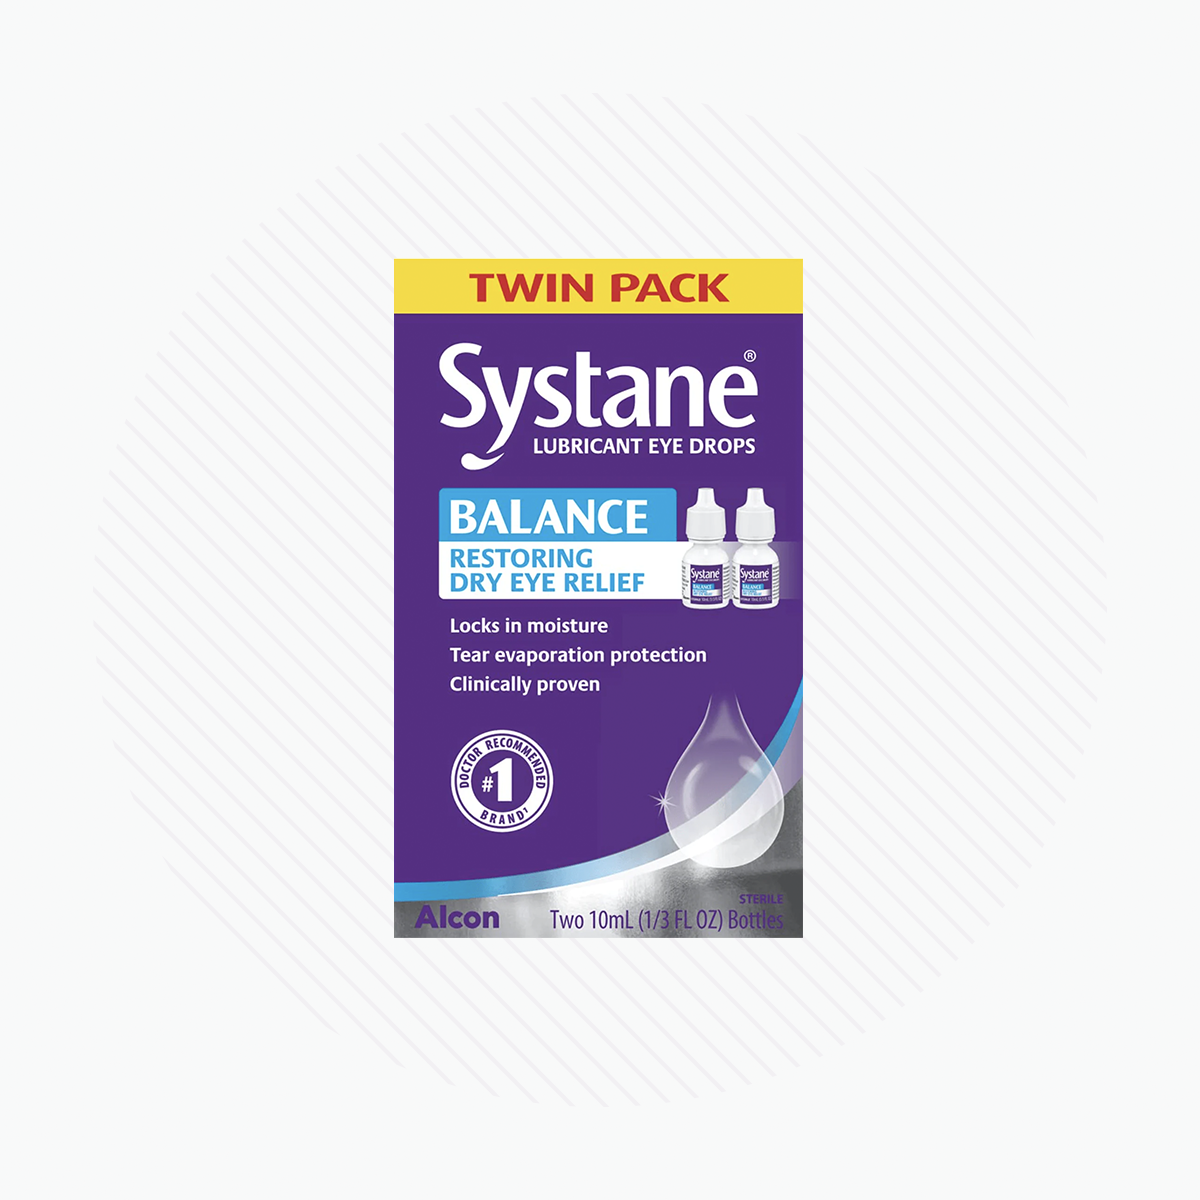 Systane Balance Lubricant Eye Drops, MGD, Tear Evaporation Protection (2 Bottles)